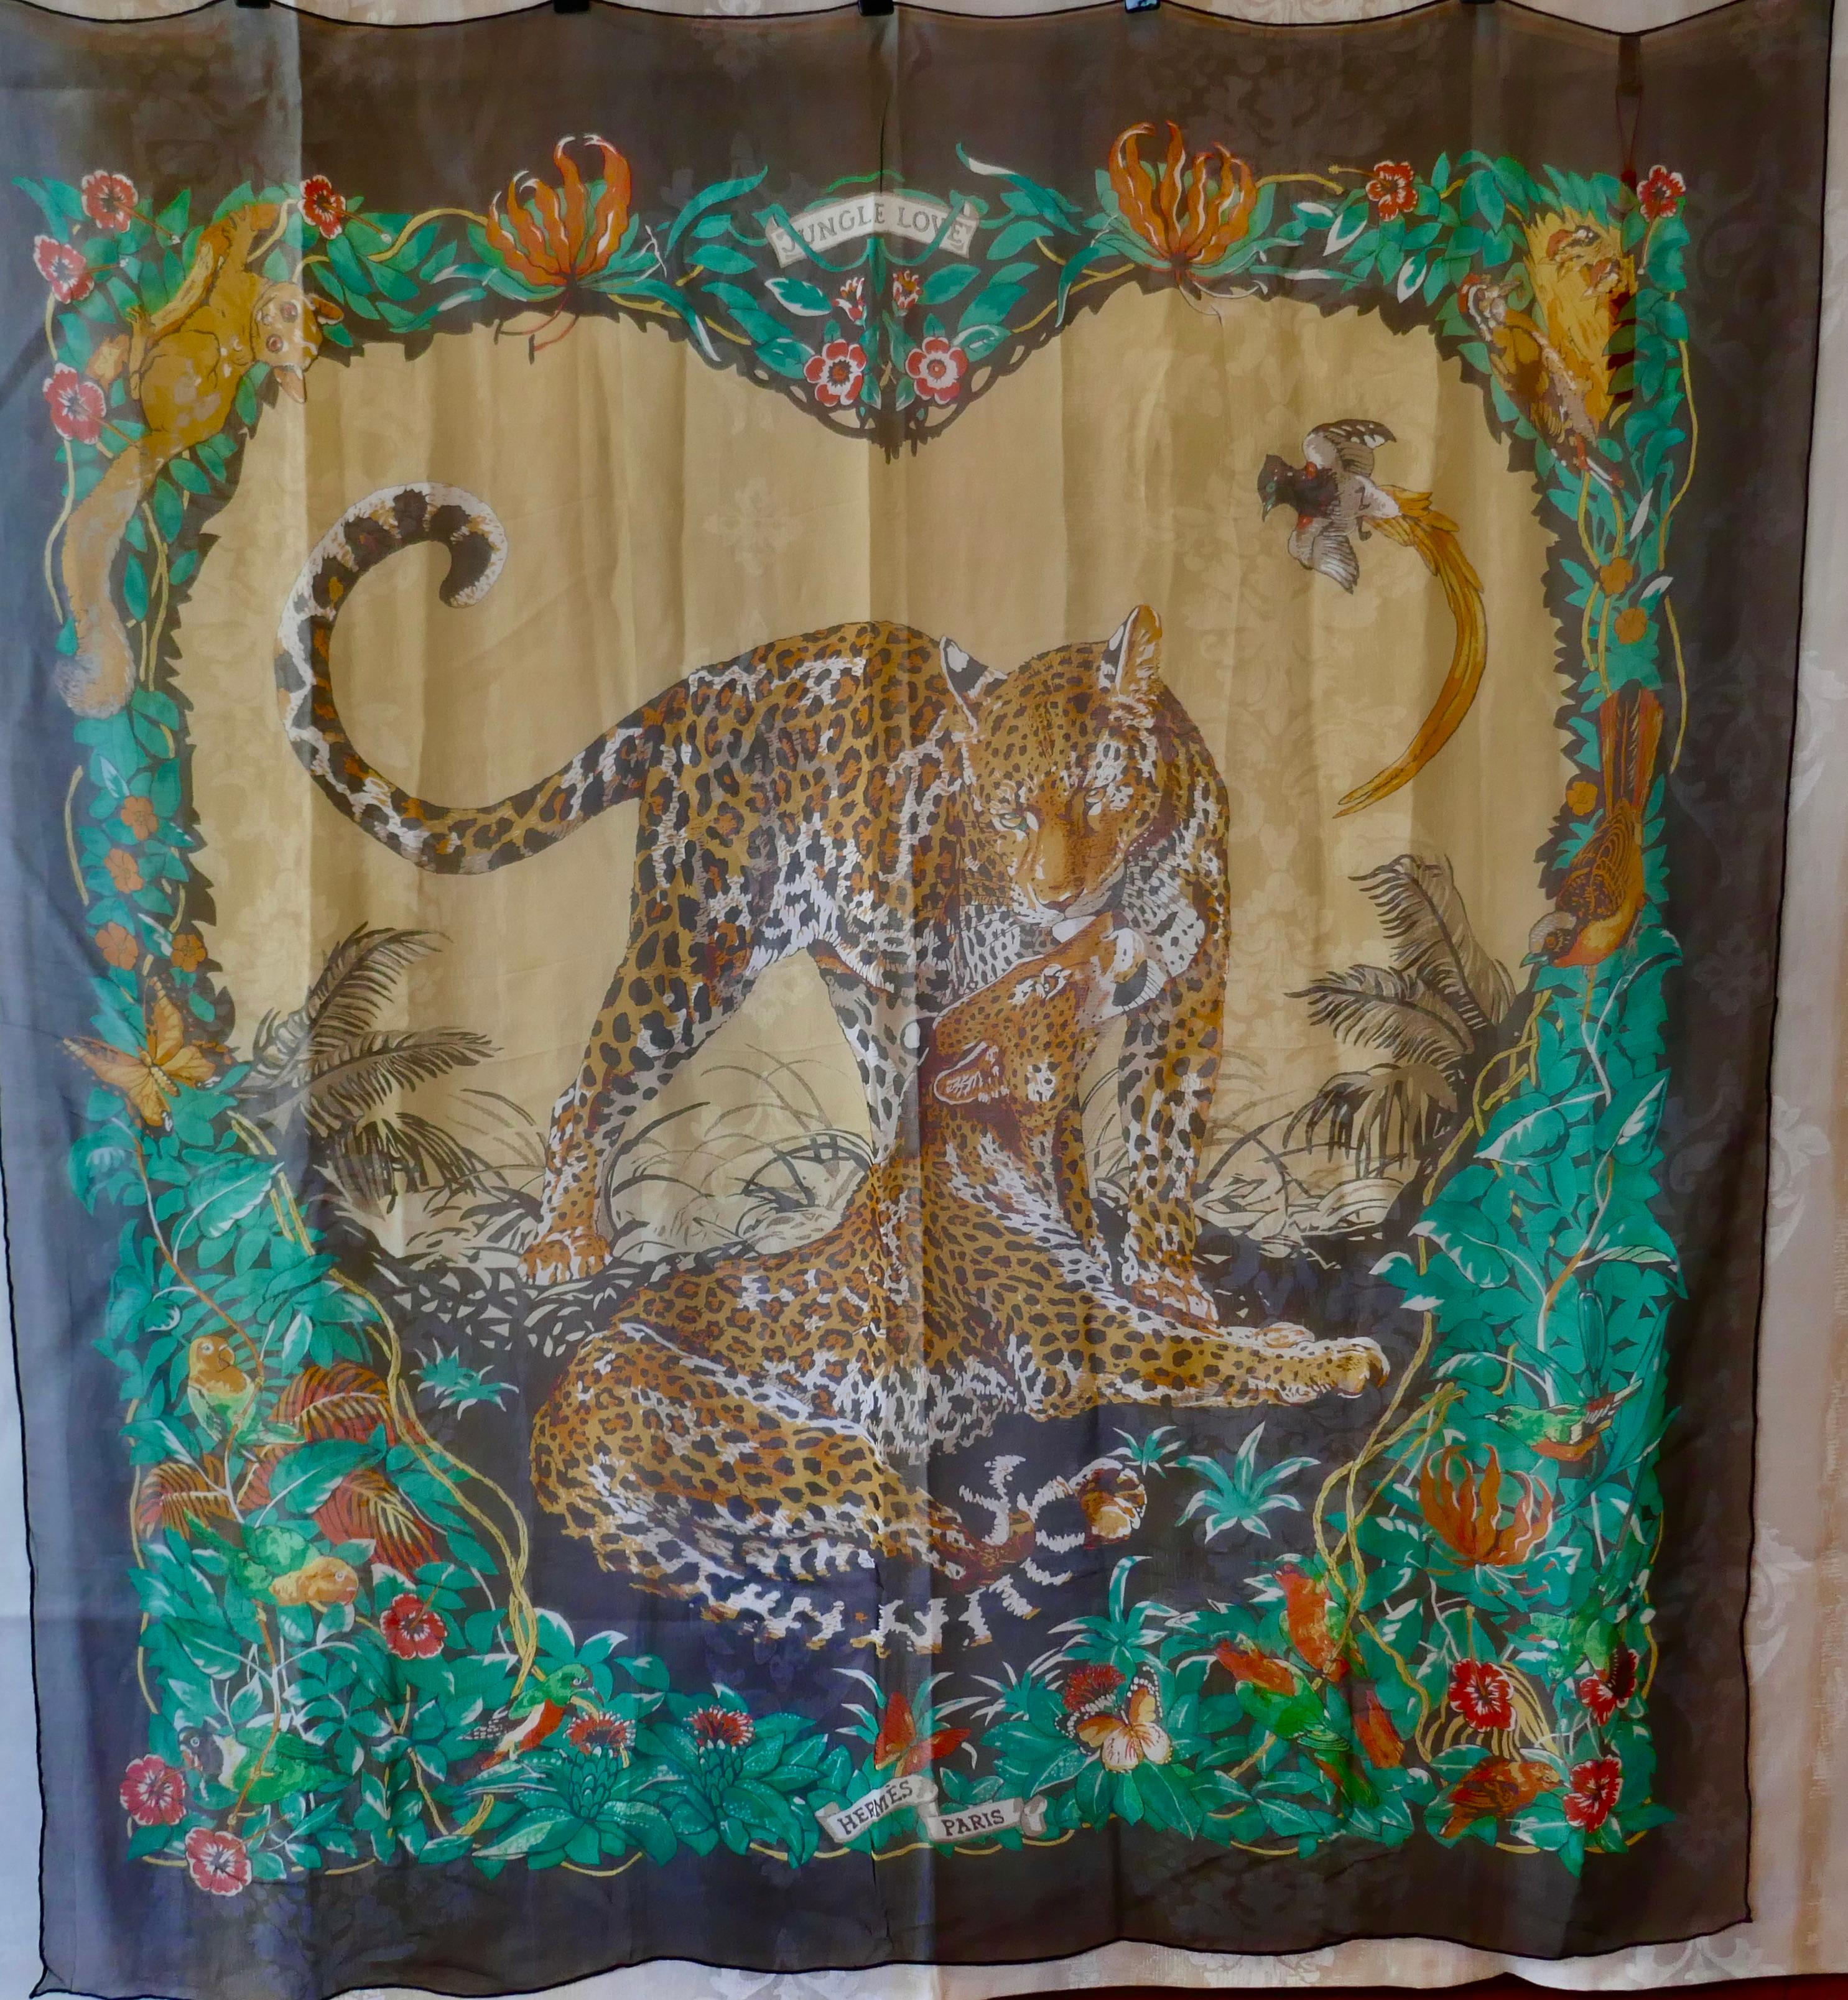 Large Hermes Silk Chiffon Shawl “Jungle Love” Design by Robert Dallet

Very Large, Light and Warm Silk Chiffon Shawl from the year 2000
Love in the heart of the Jungle, leopard style surrounded with flowers and birds
Wonderful design,Very large